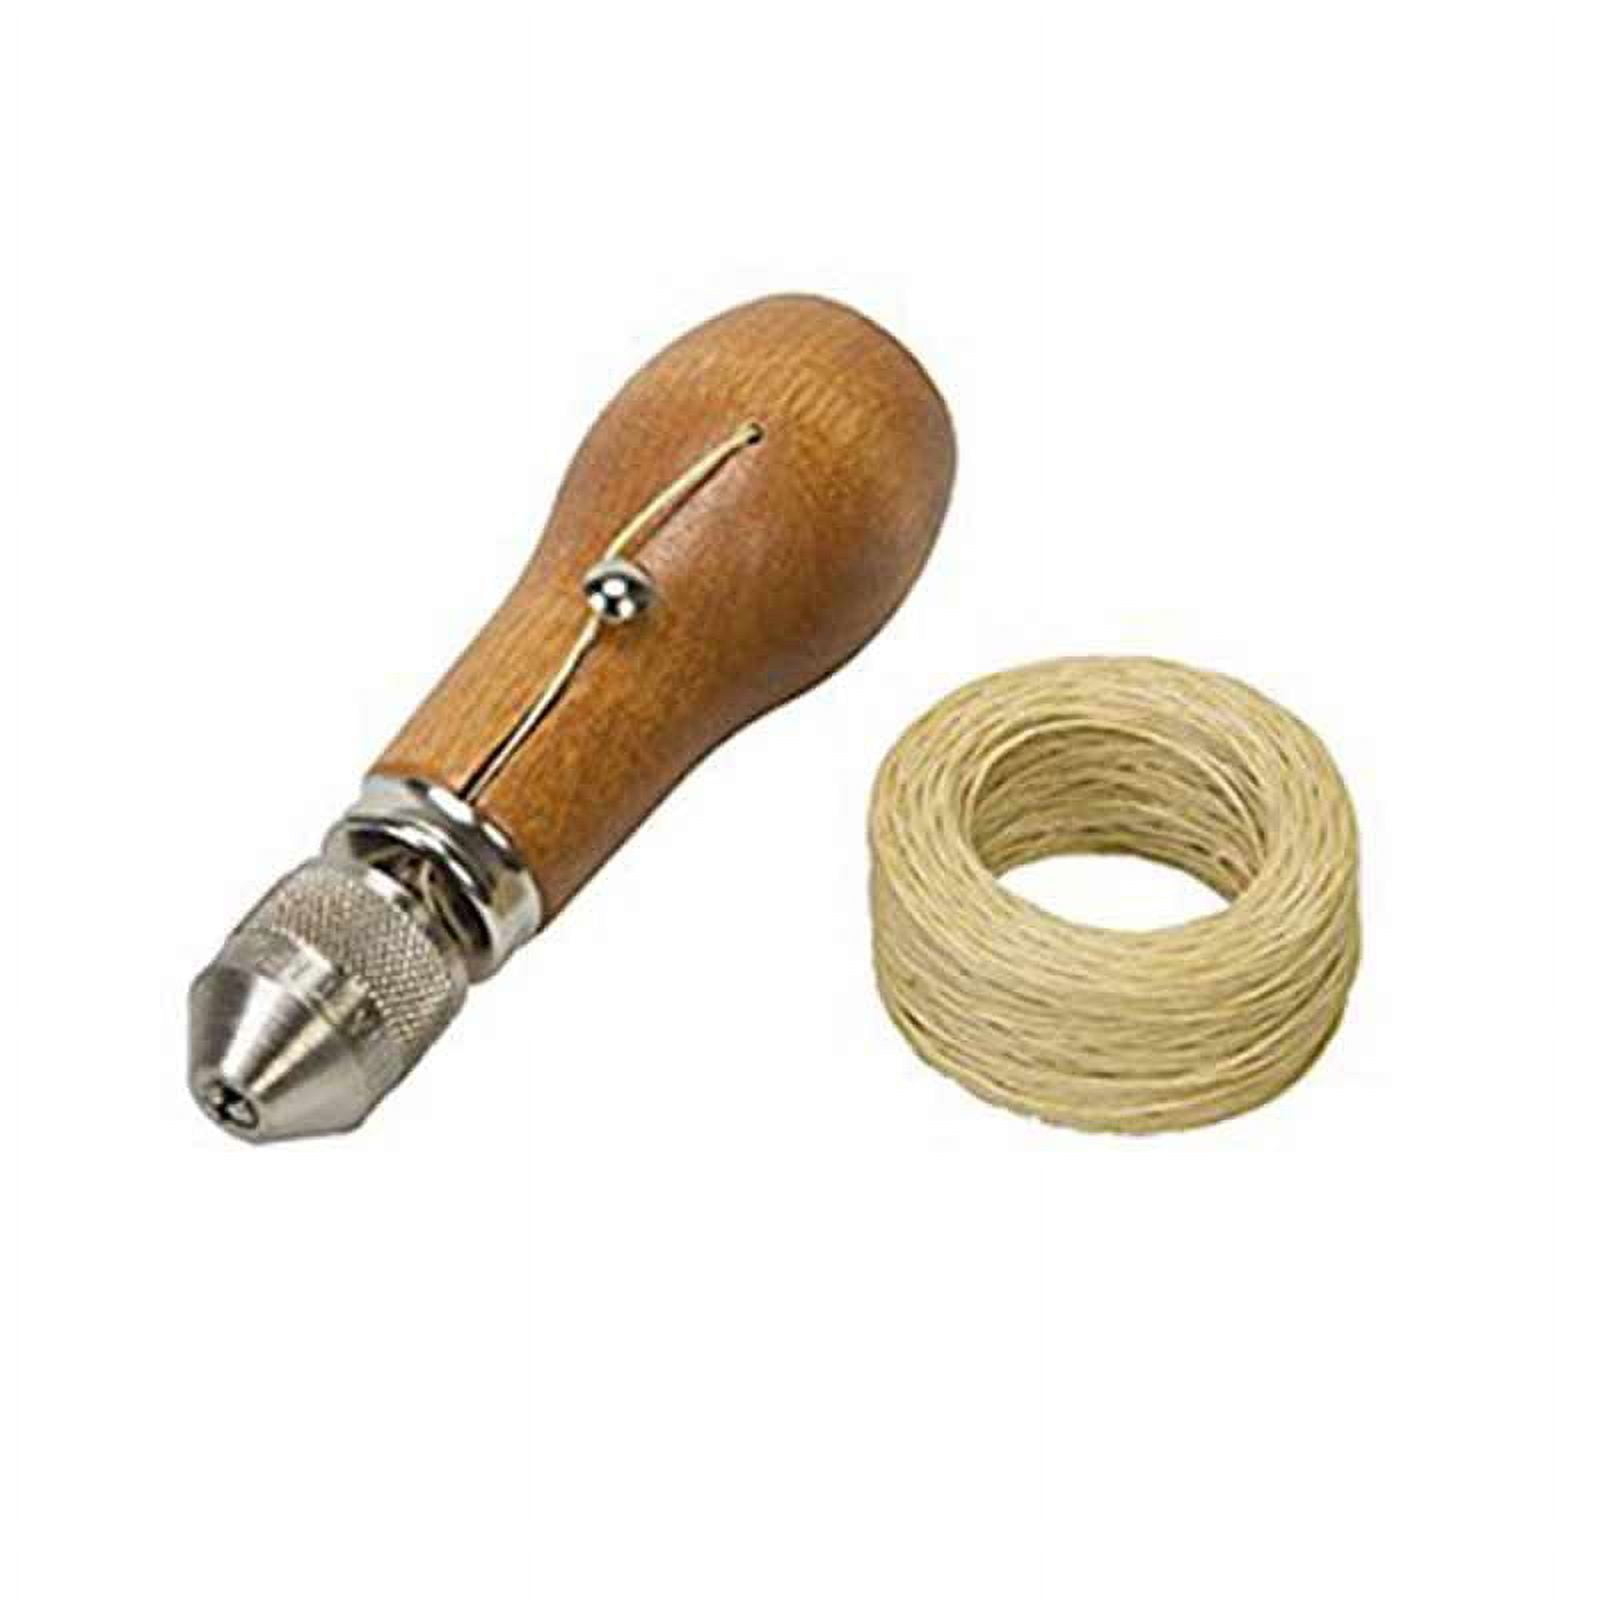 Becho Professional Stitcher Sewing Awl Leather Craft Making,Stitcher Repair Accessory Tool Kit for Leather Sail,Heavy Canvas and More